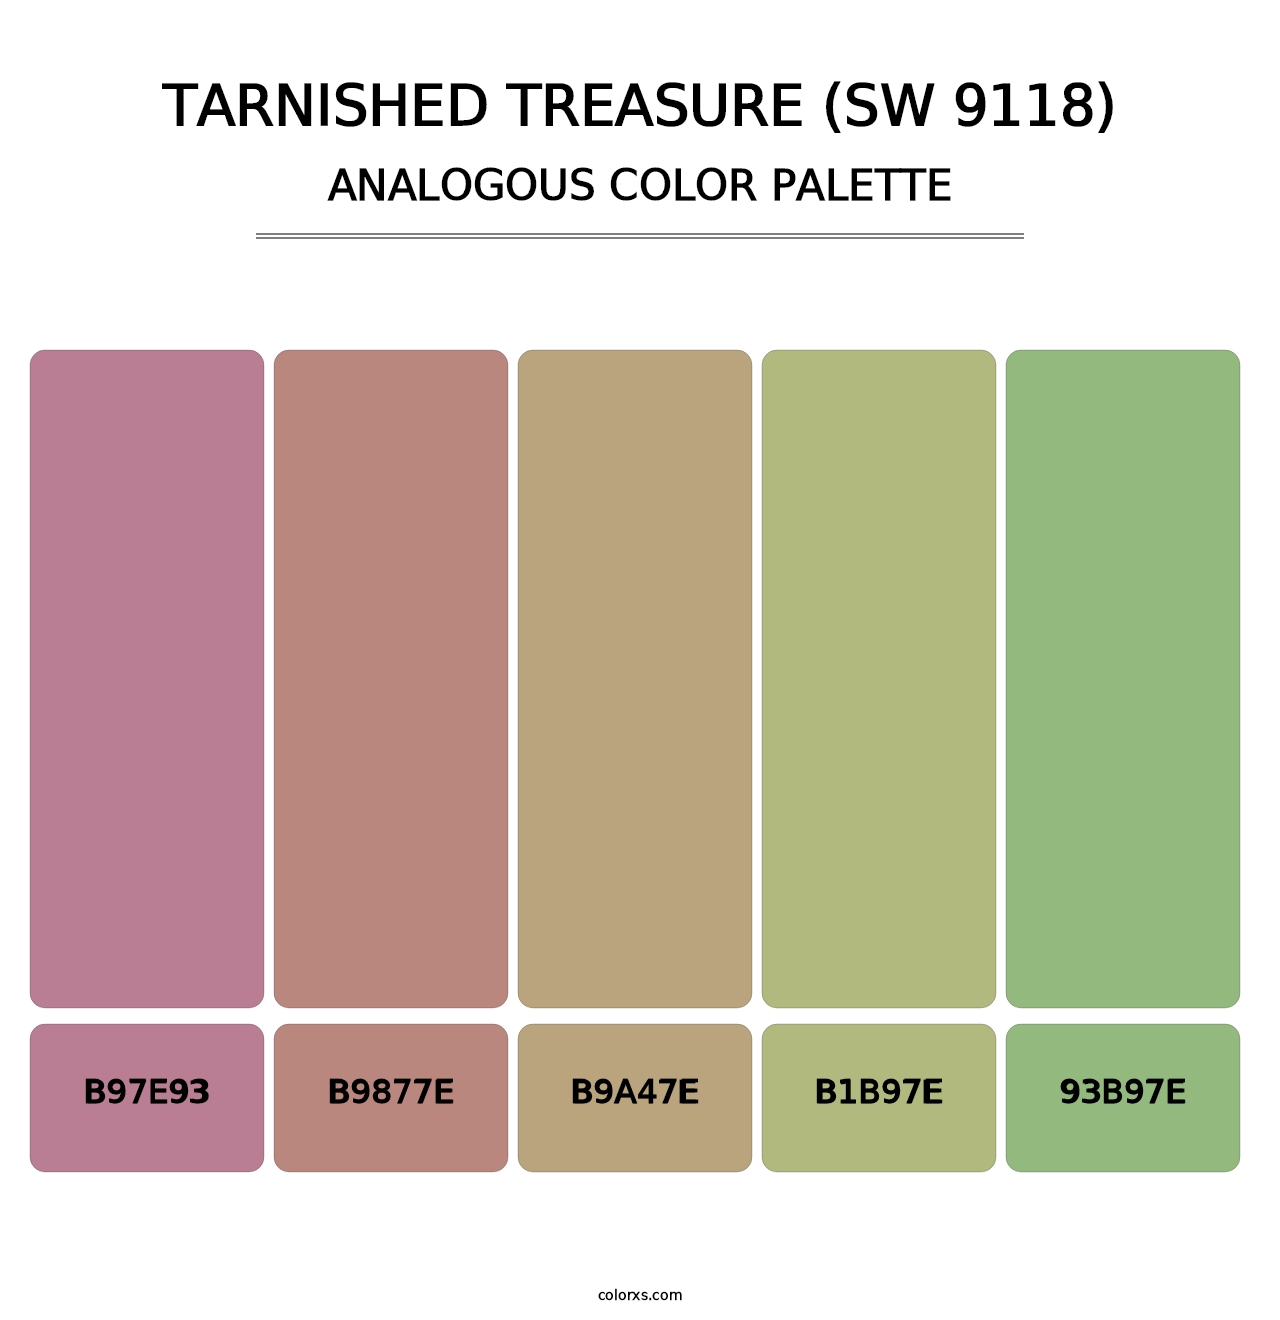 Tarnished Treasure (SW 9118) - Analogous Color Palette